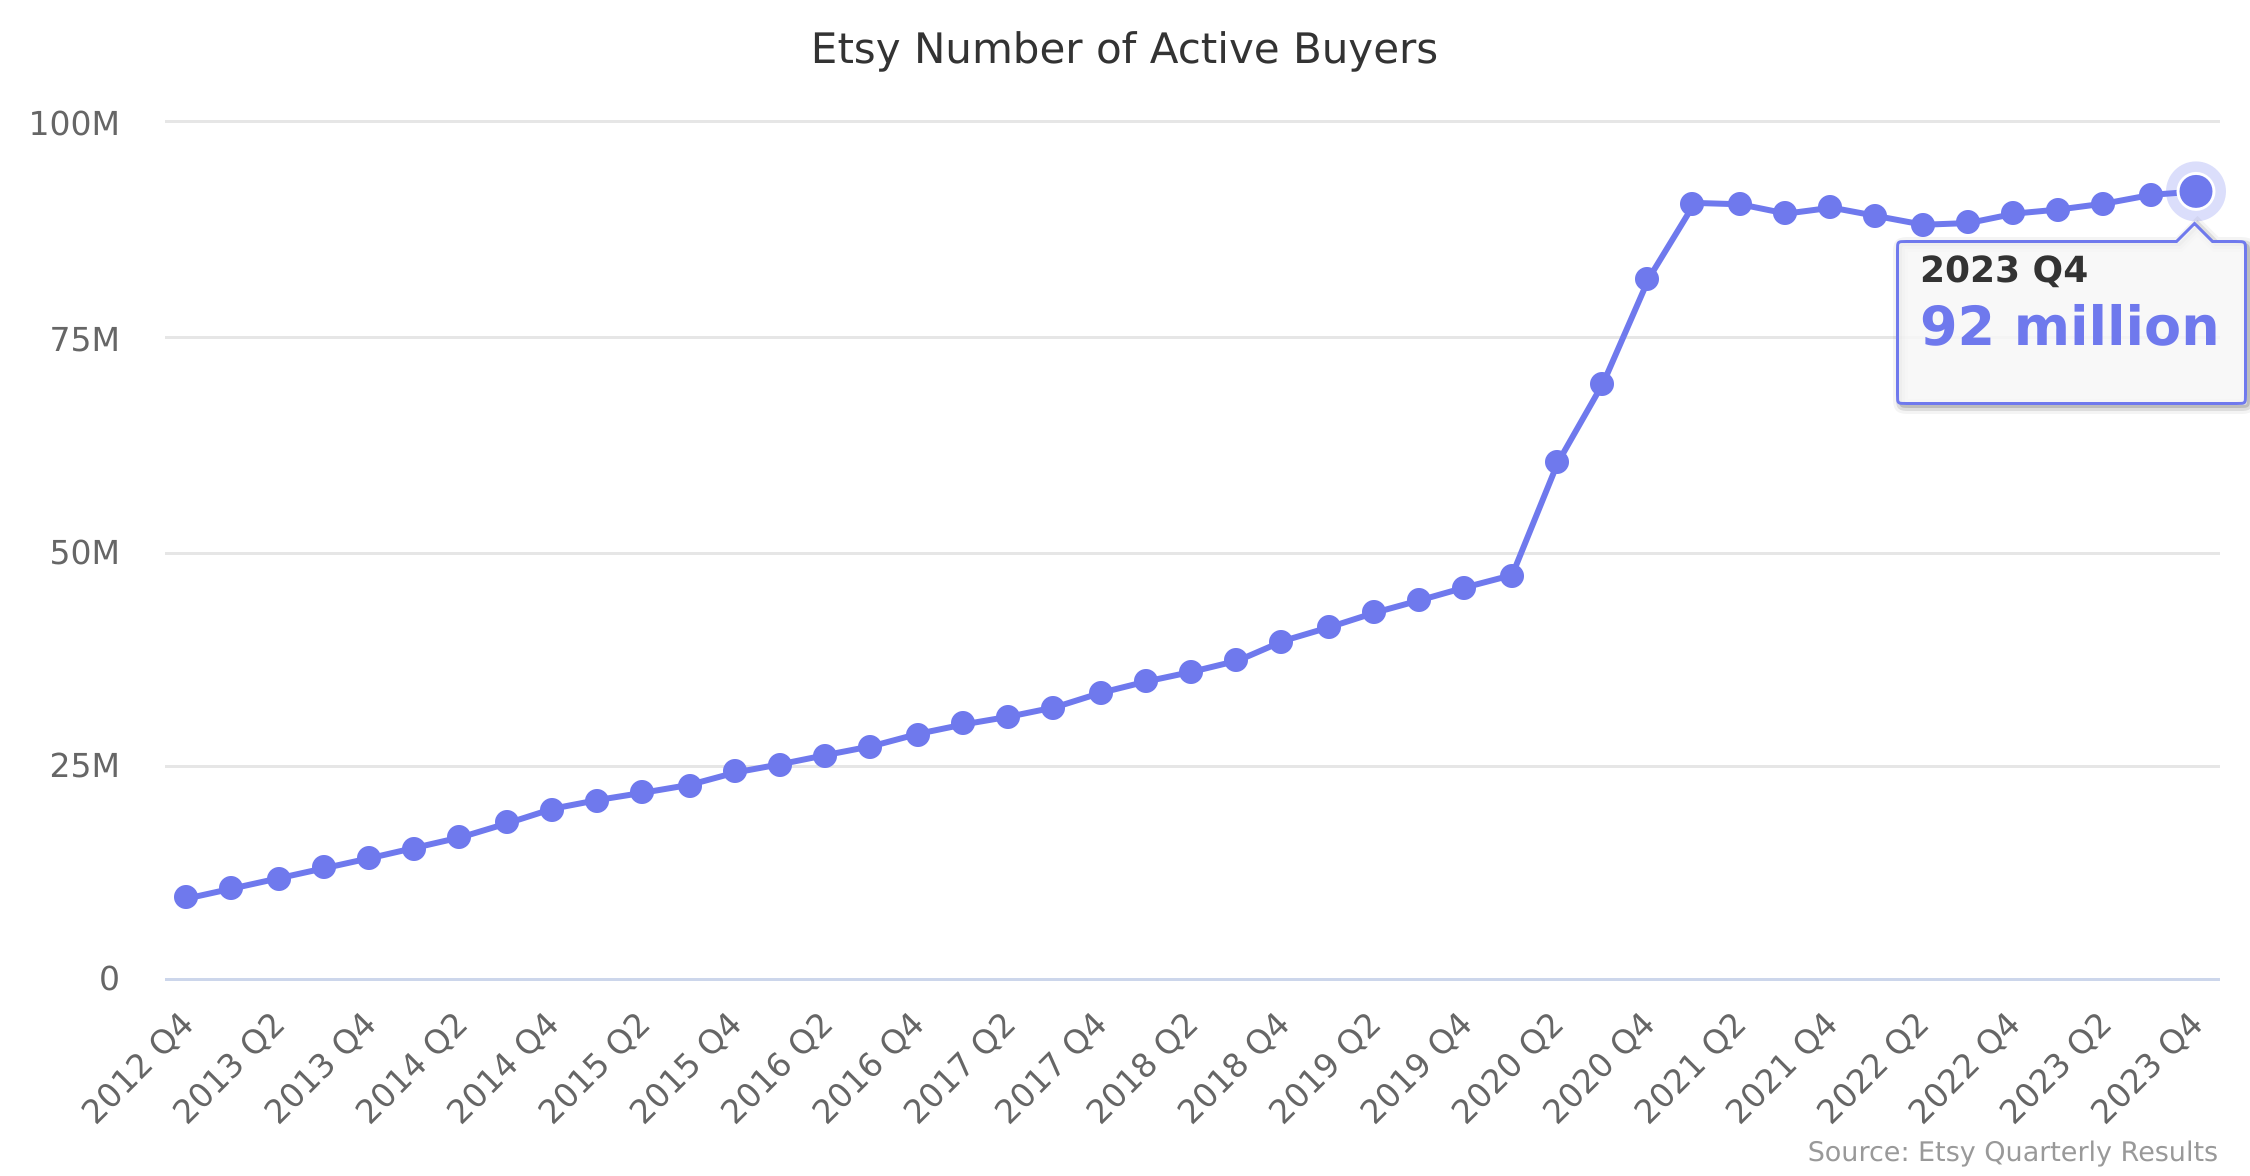 Etsy Number of Active Buyers 2012-2023